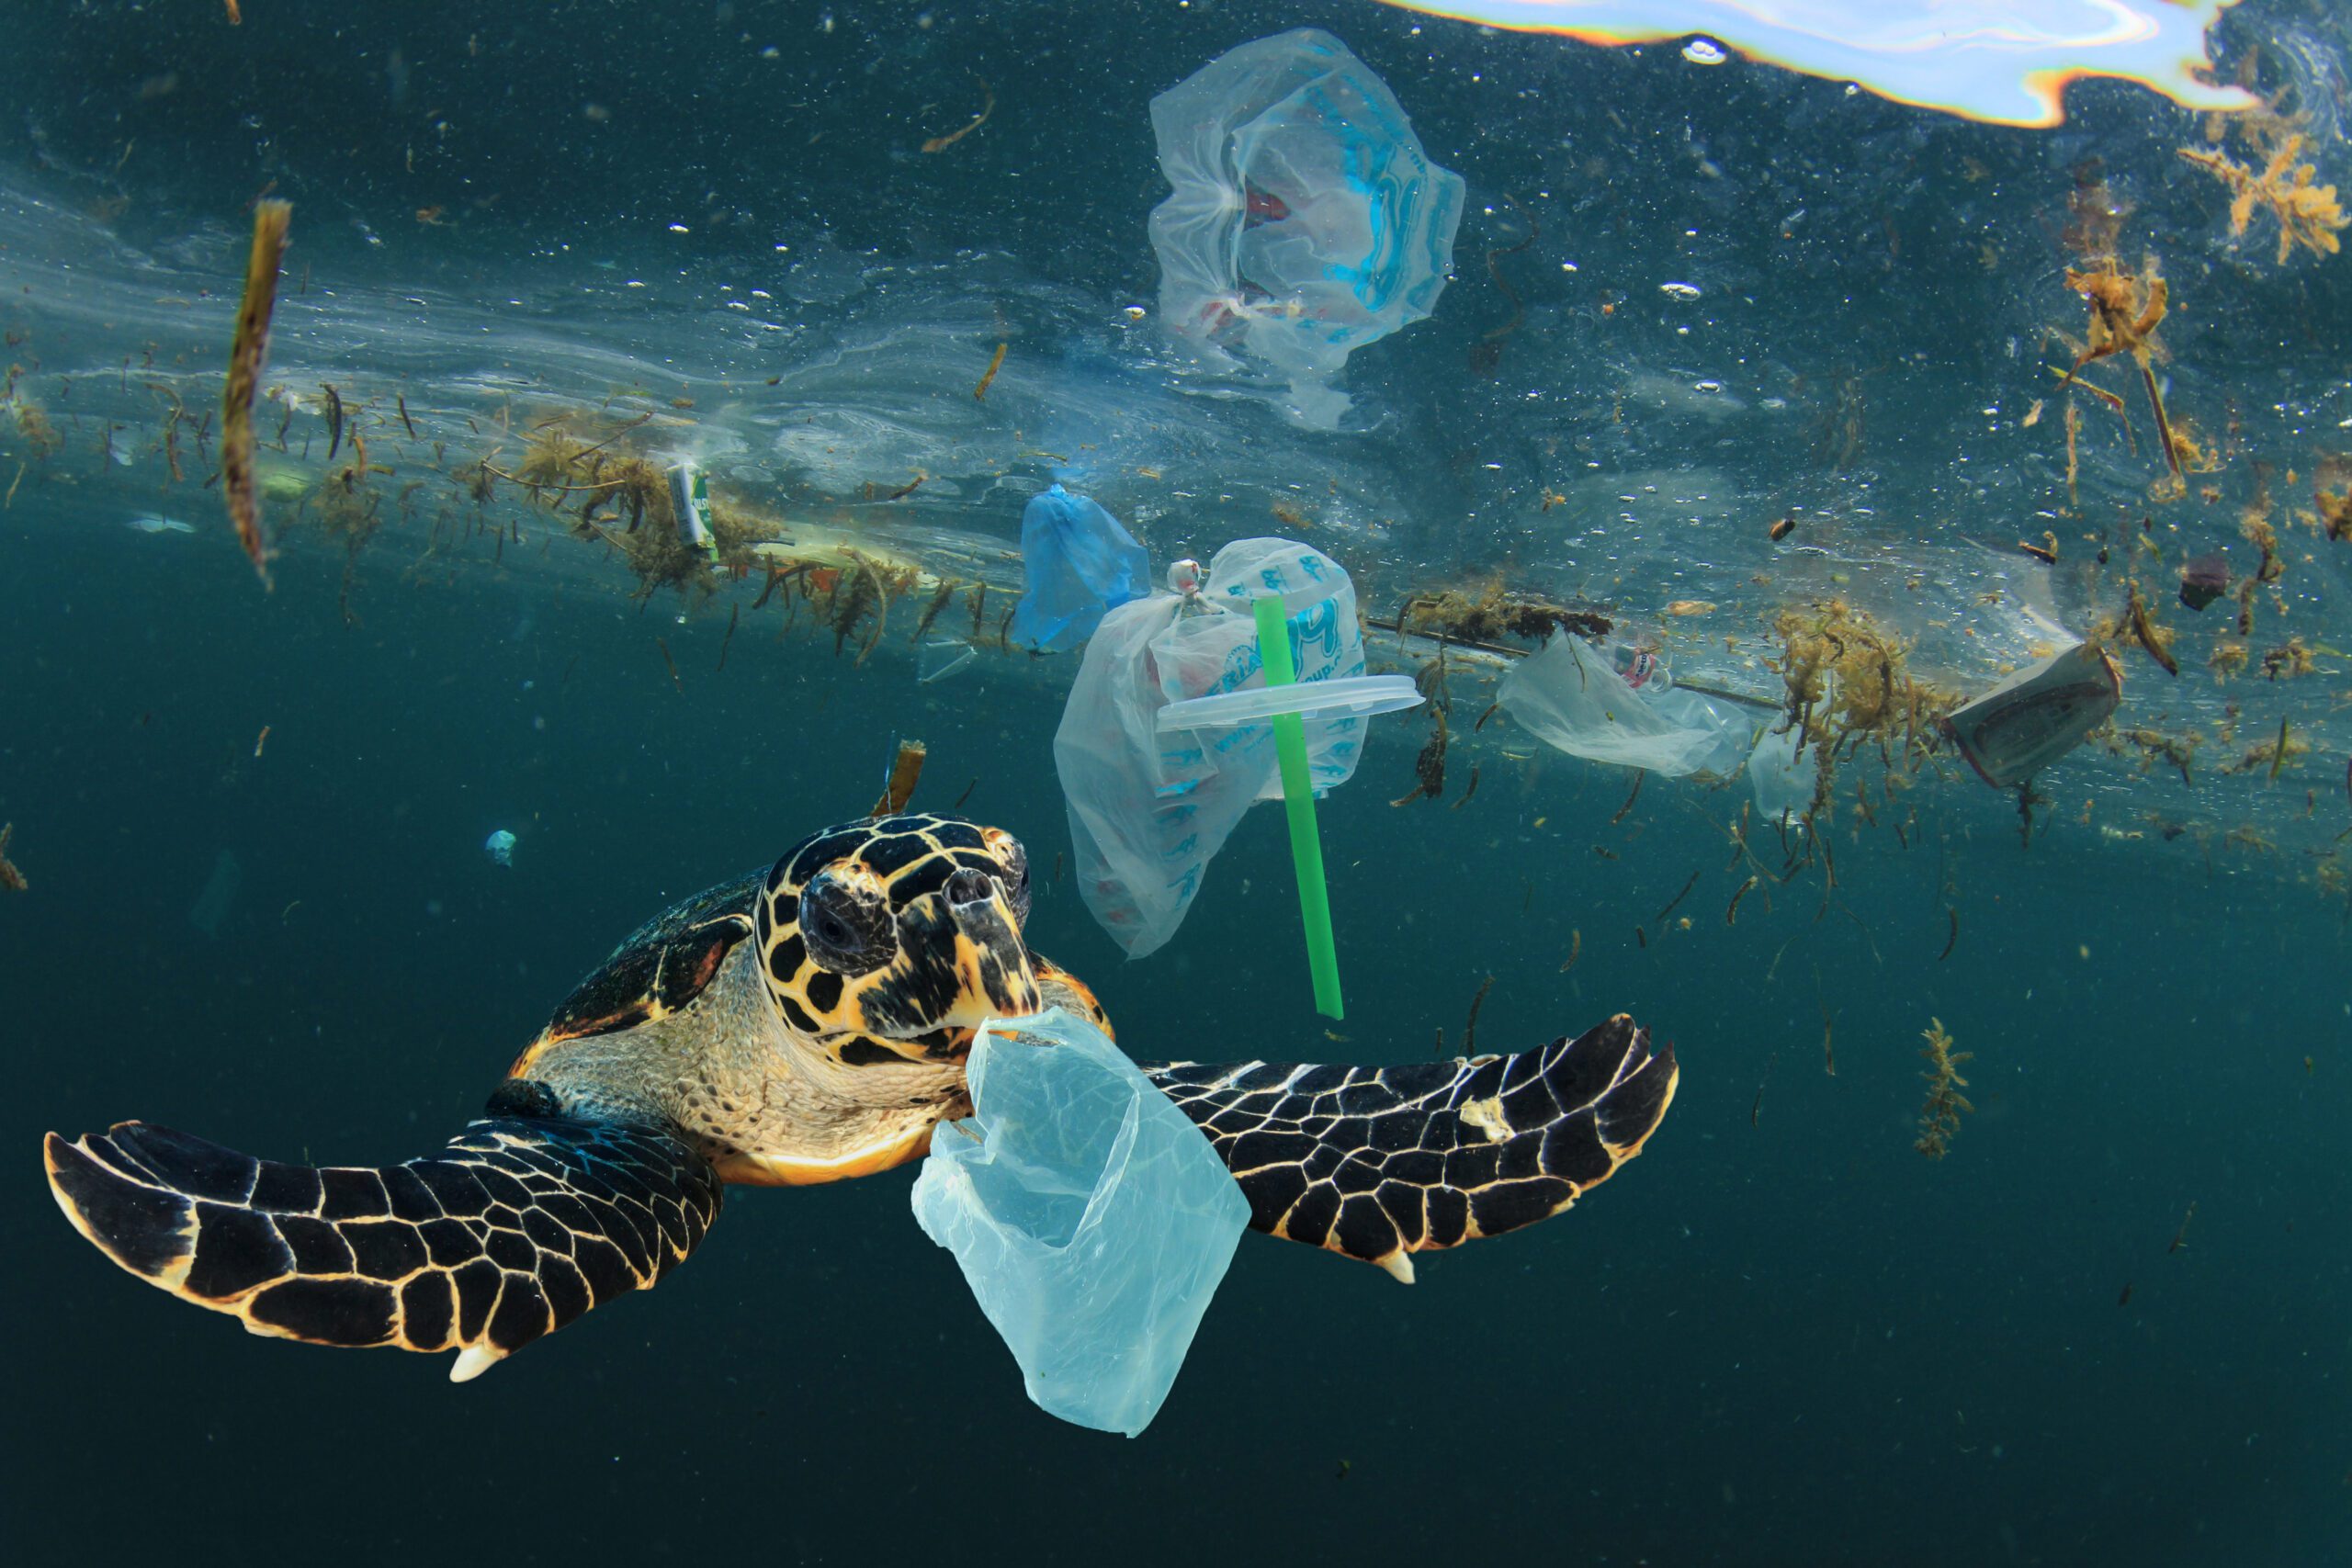 A sea turtle swimming in the ocean surrounded by plastic waste.